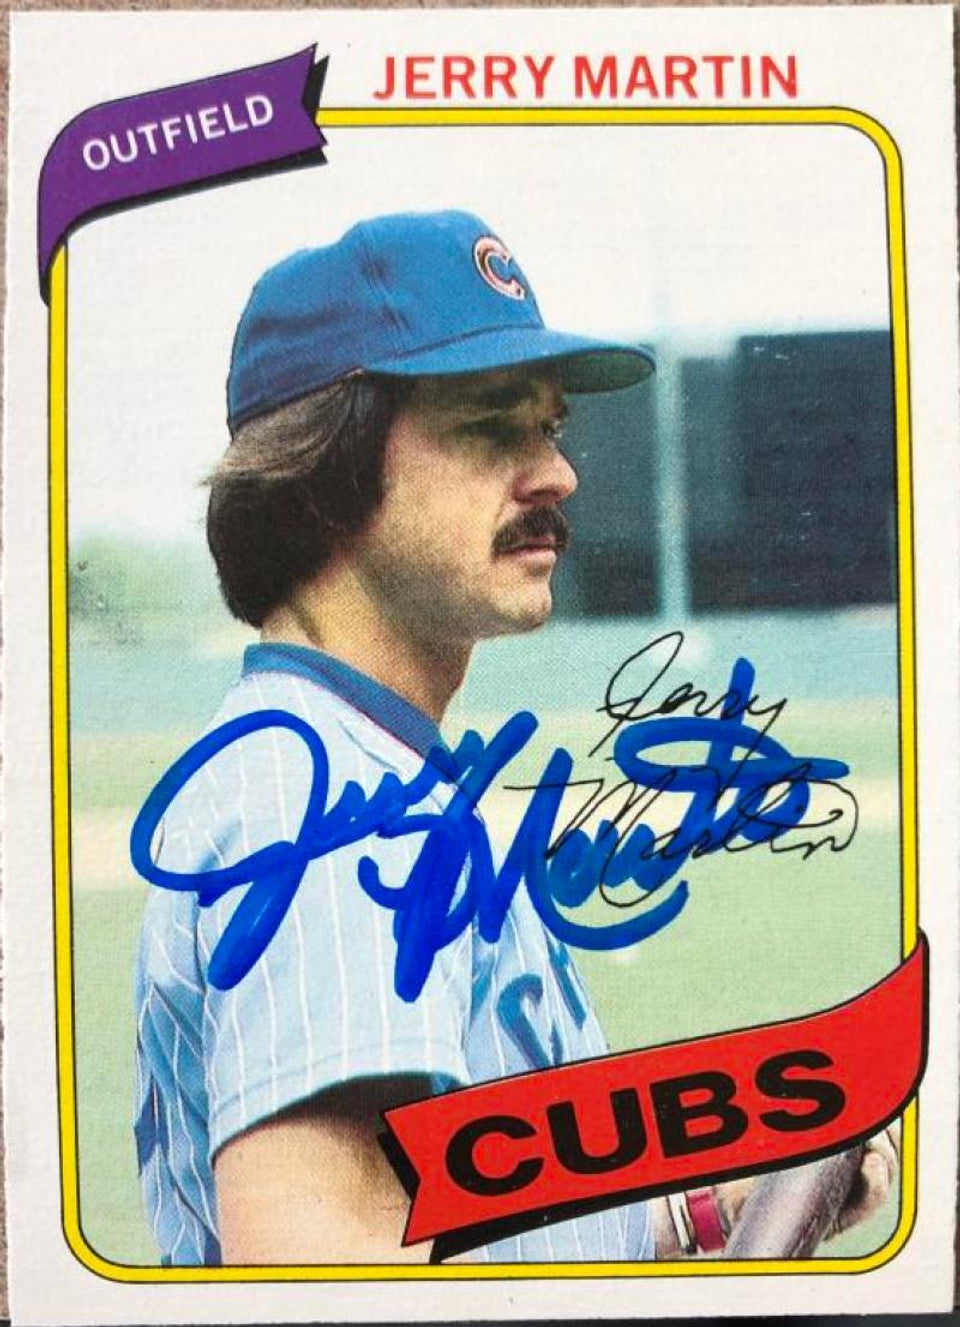 Jerry Martin Signed 1980 Topps Baseball Card - Chicago Cubs